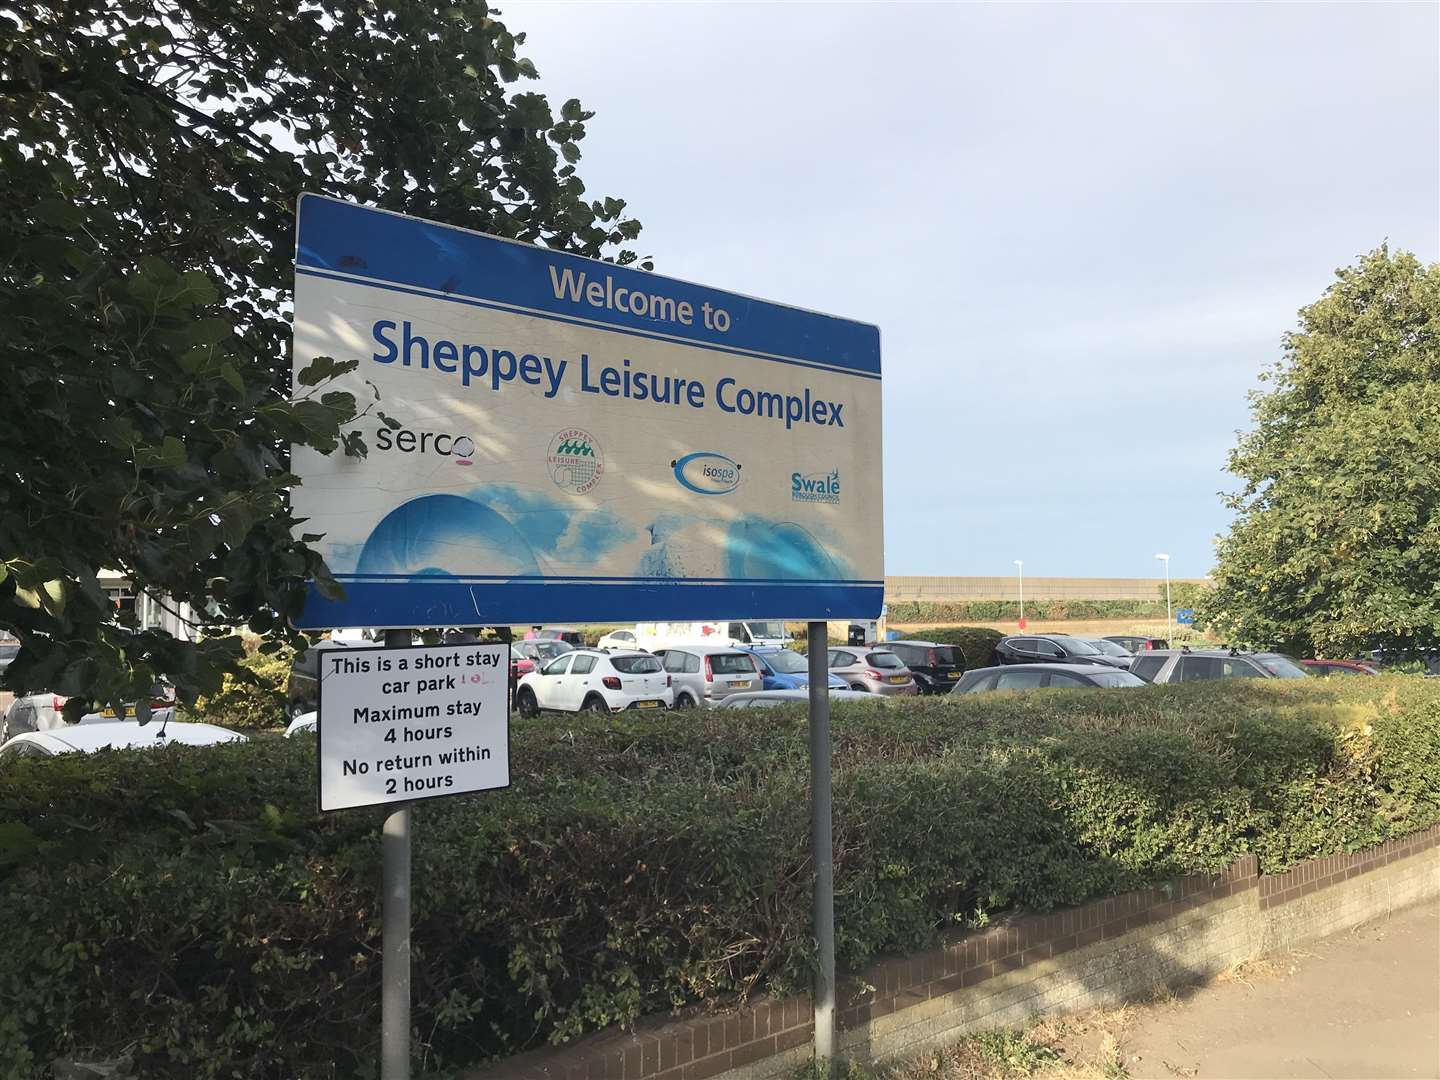 Sheppey Leisure Complex in Sheerness